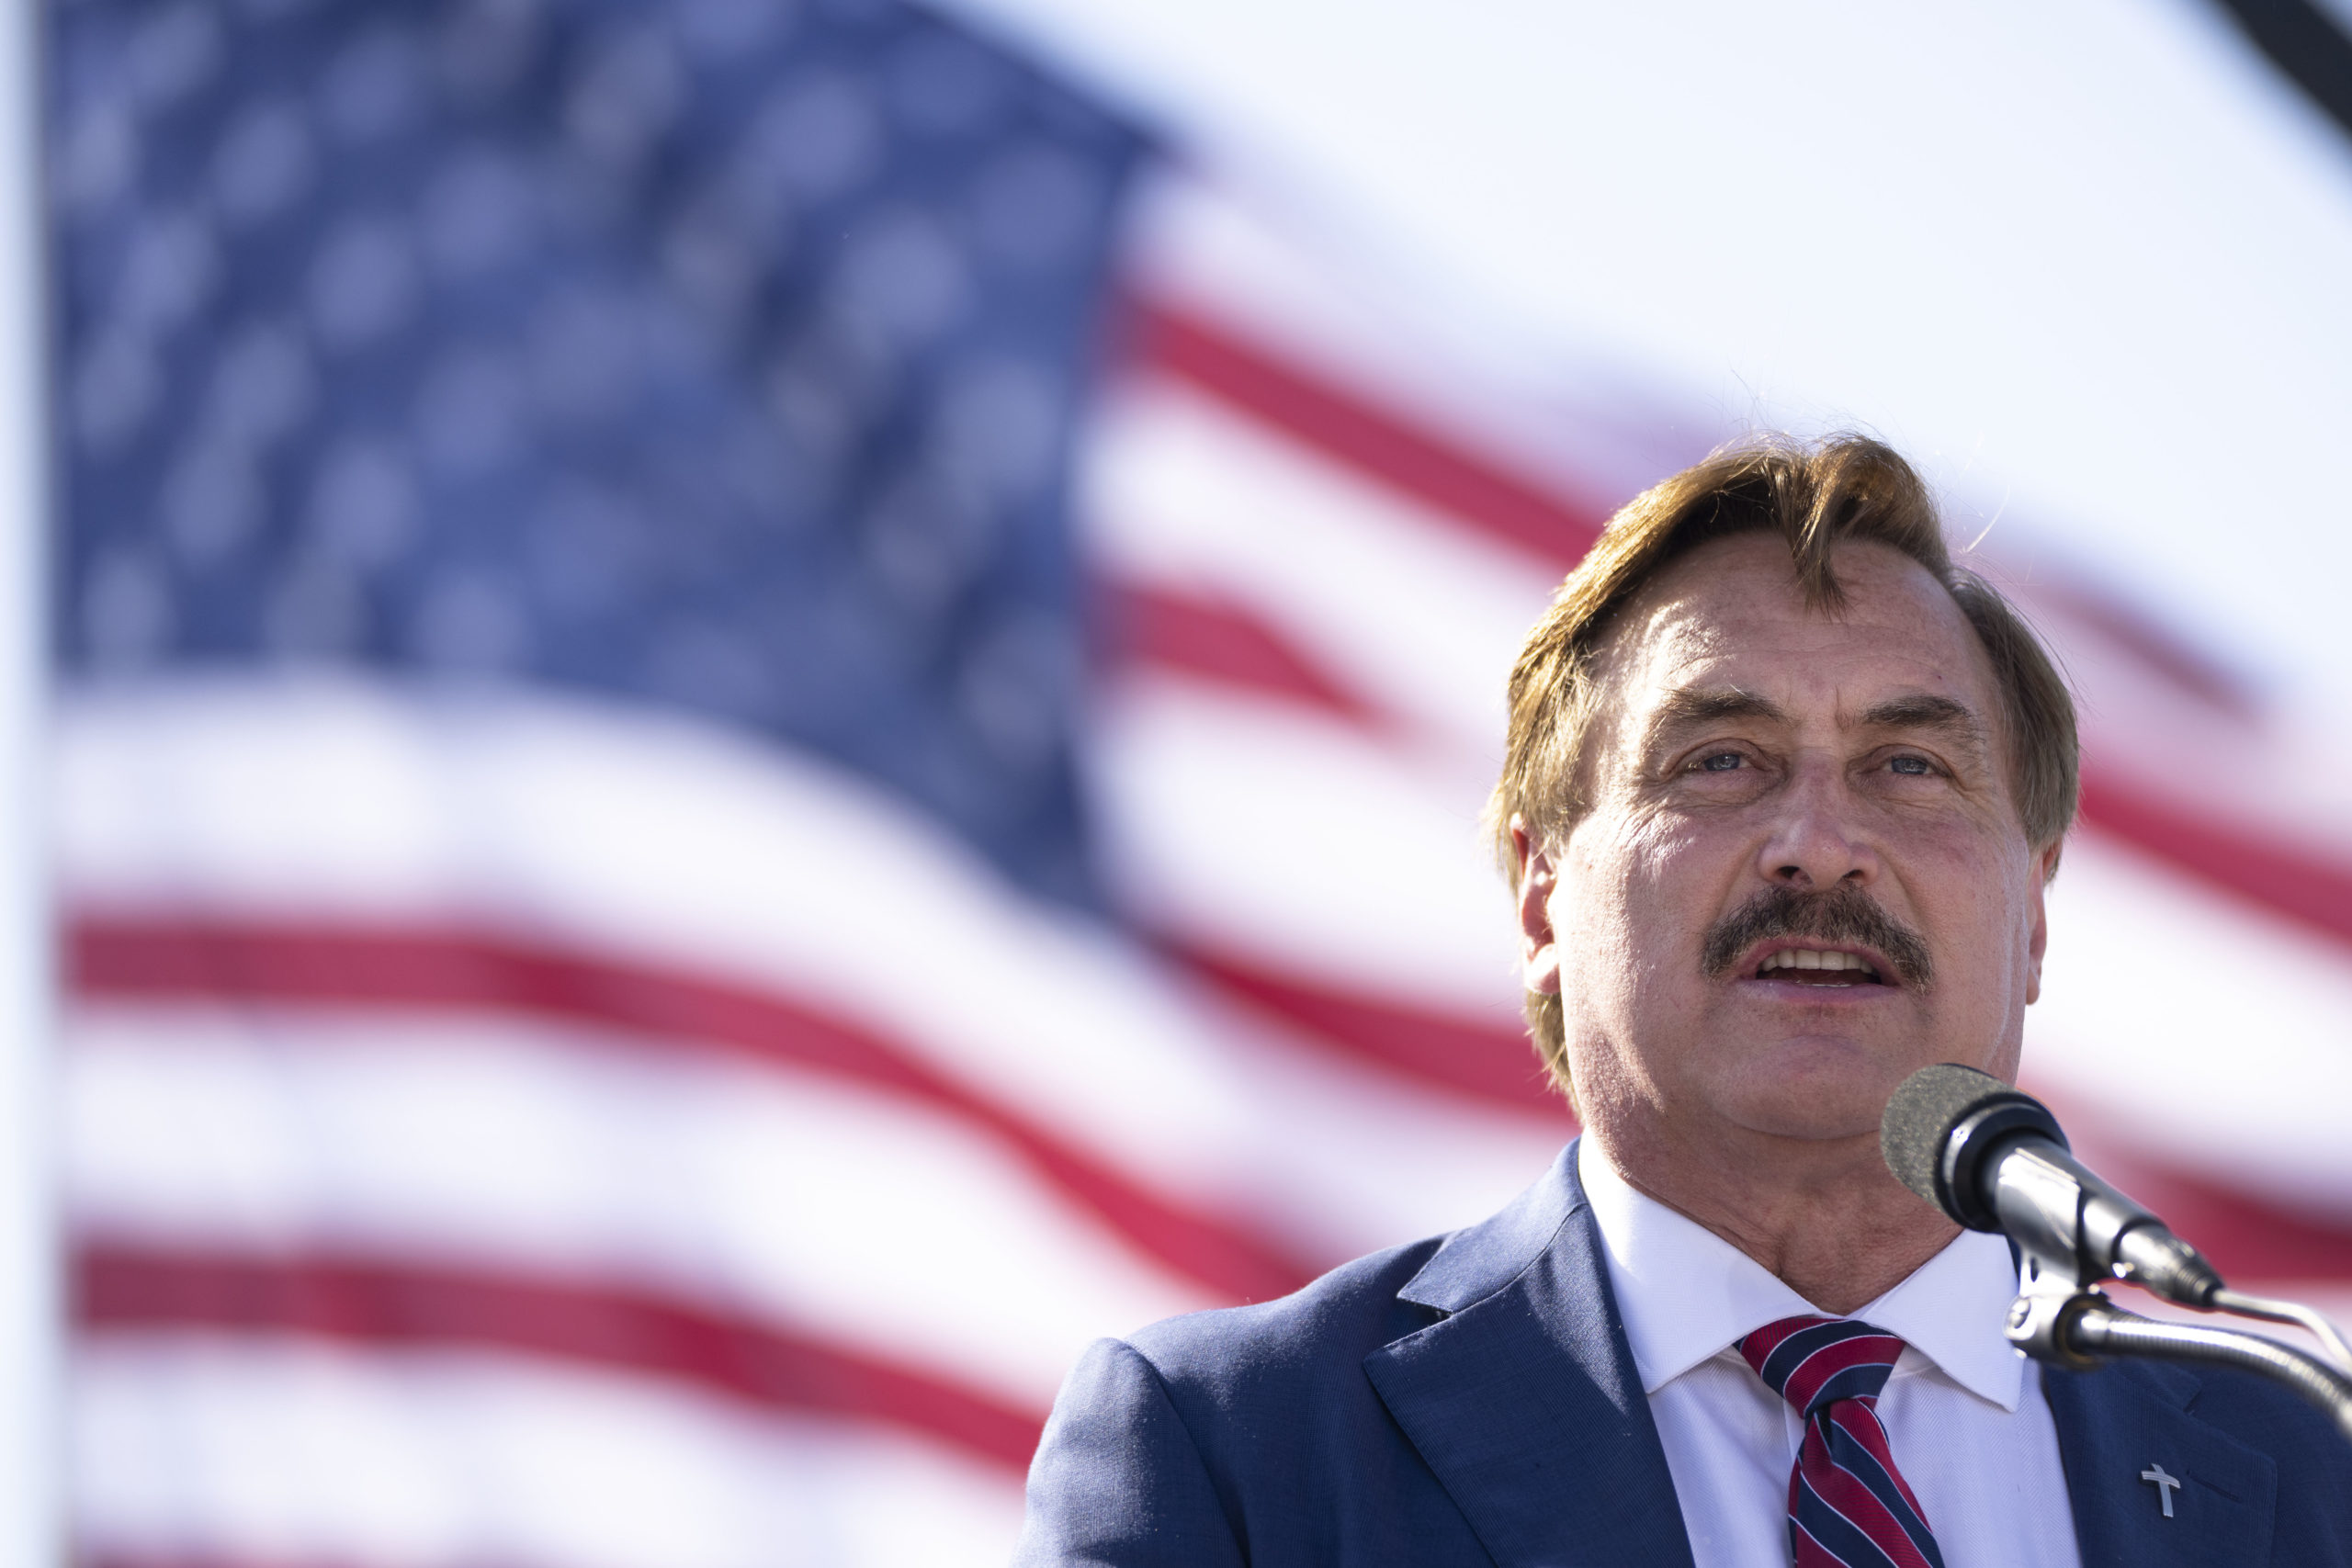 Mike Lindell, CEO of MyPillow, speaks during a rally hosted by former President Donald Trump at the Delaware County Fairgrounds in Delaware, Ohio, on April 23.